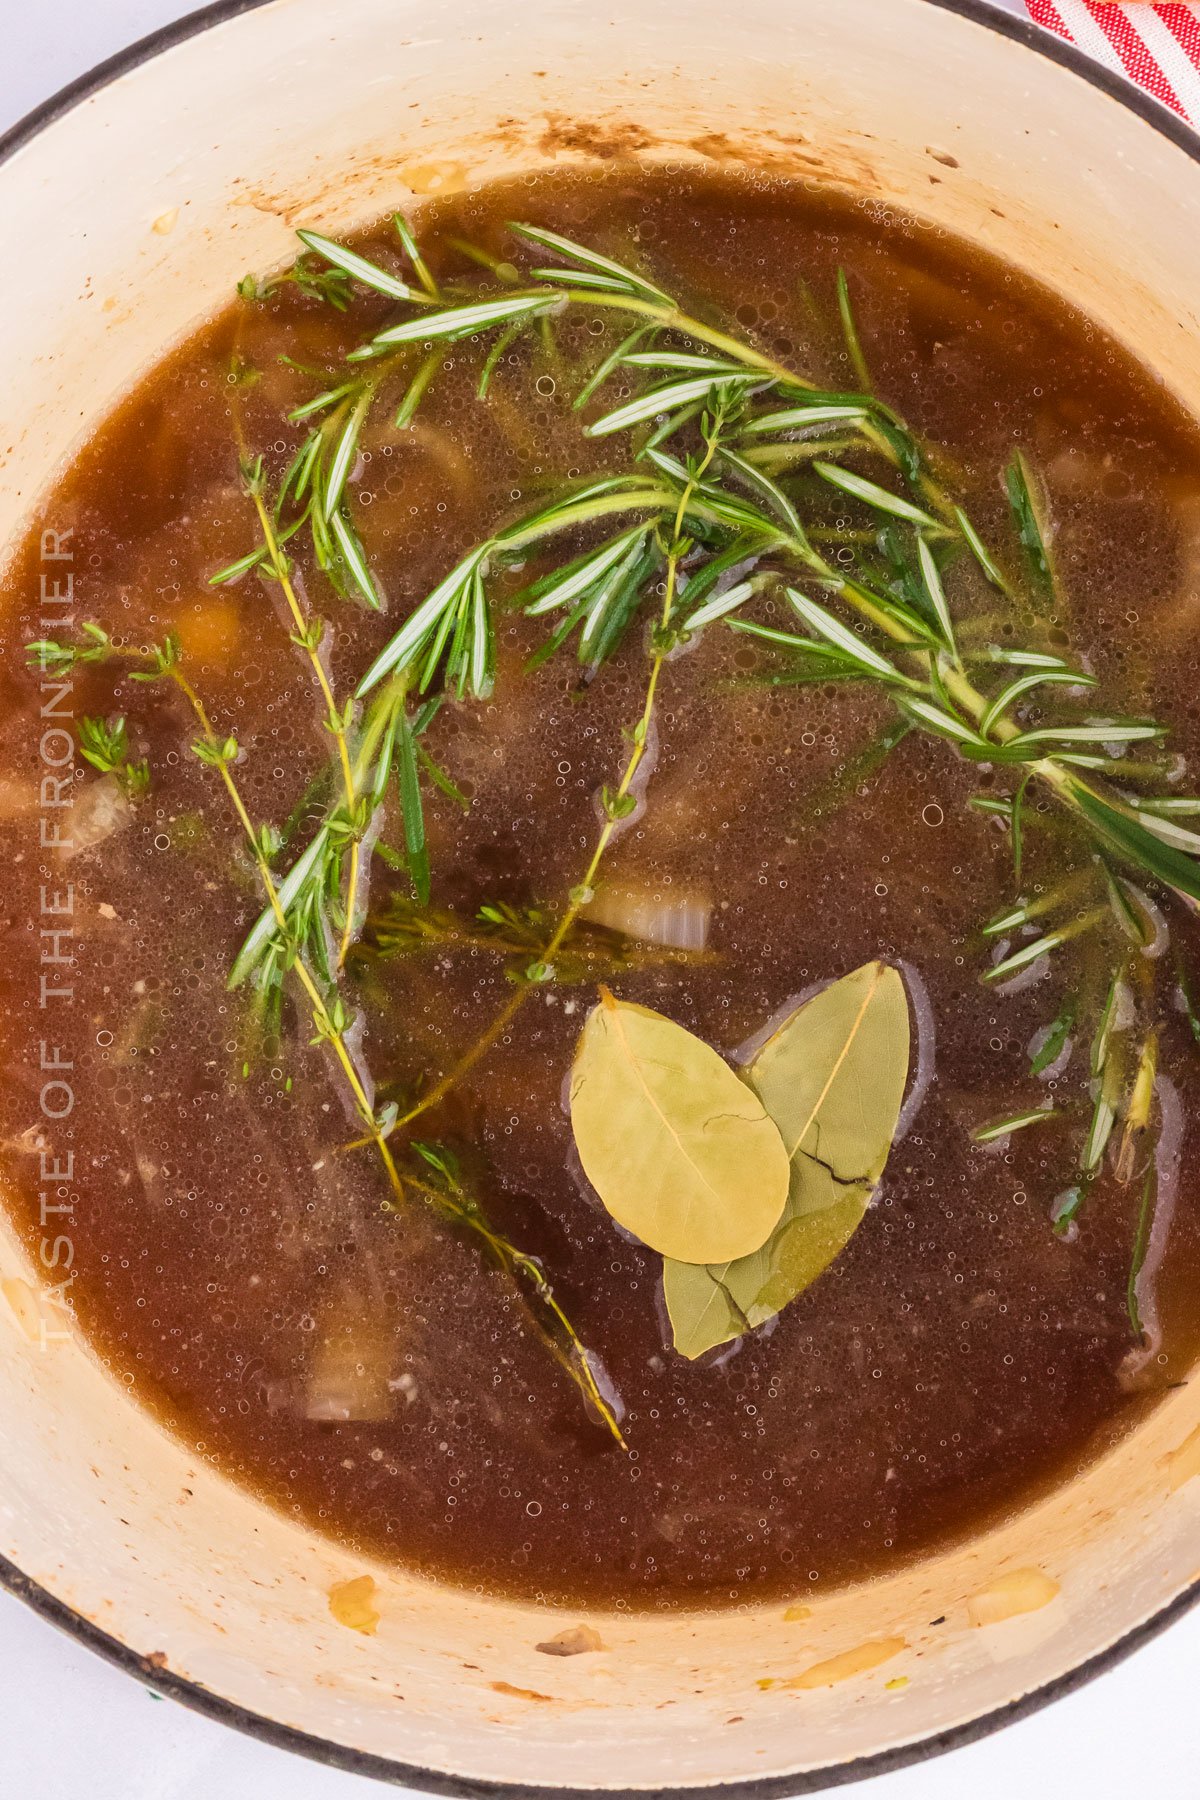 simmer with herbs